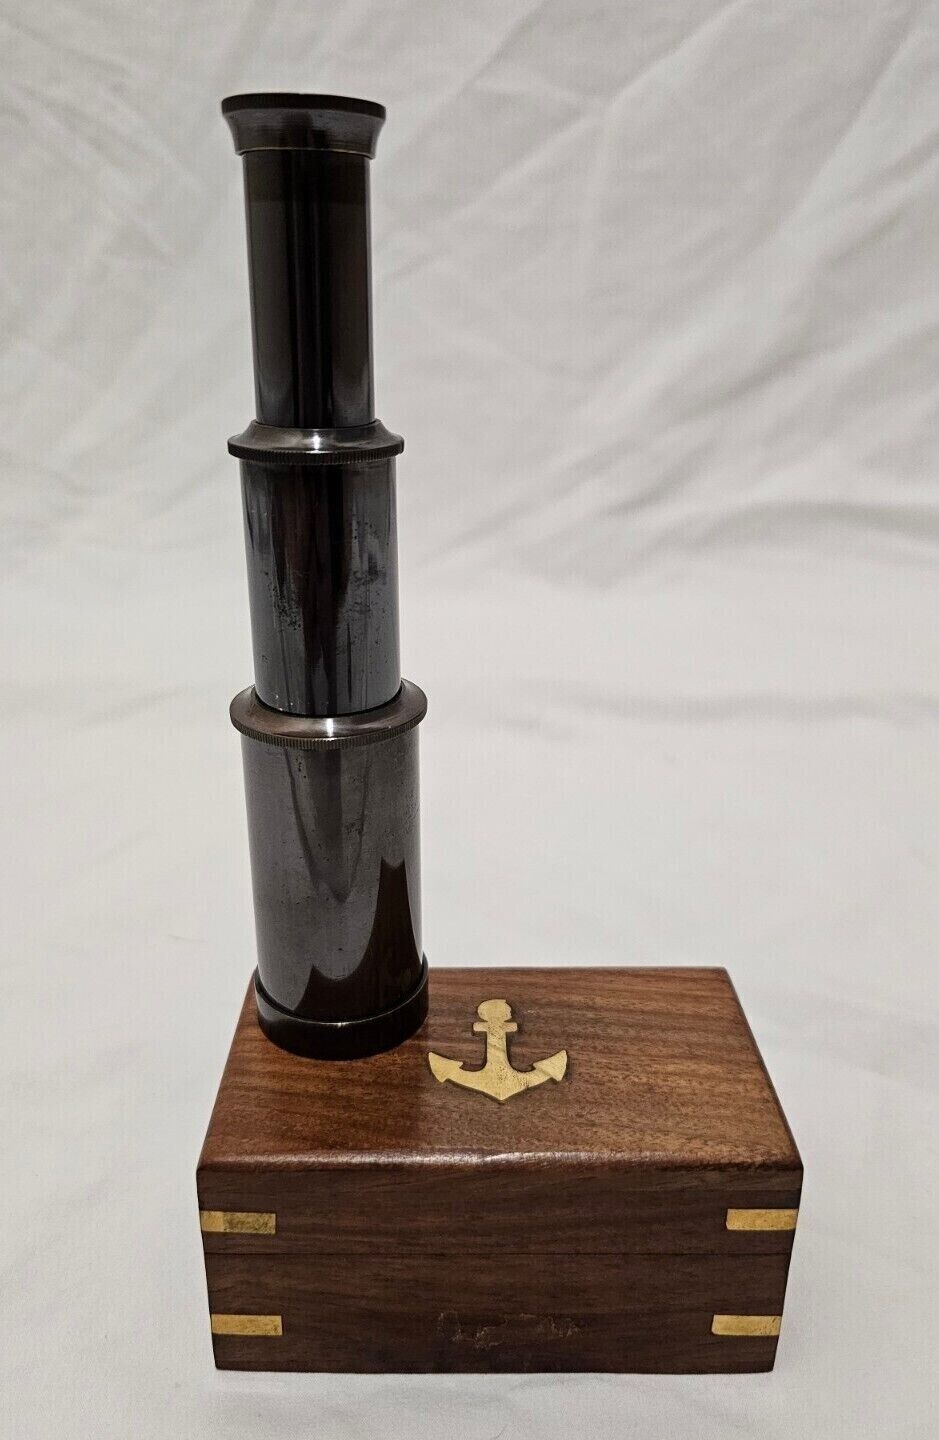 Vintage Nautical Telescope with Wooden Box Brass Spyglass Handheld Collectible